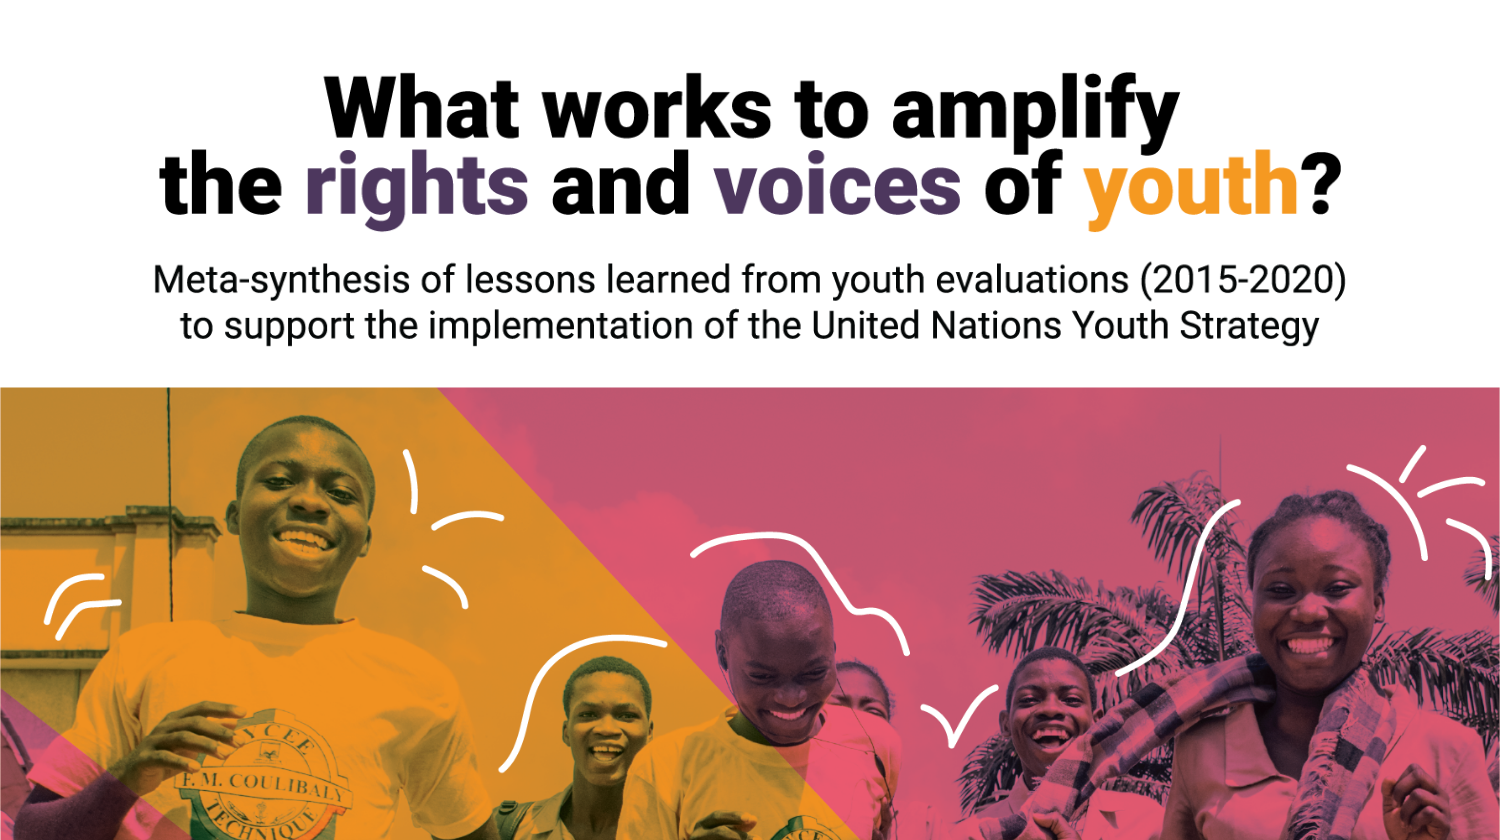 What works to amplify the rights and voices of youth? Meta-synthesis of lessons learned from youth evaluations (2015-2020) to support the implementation of the United Nations Youth Strategy